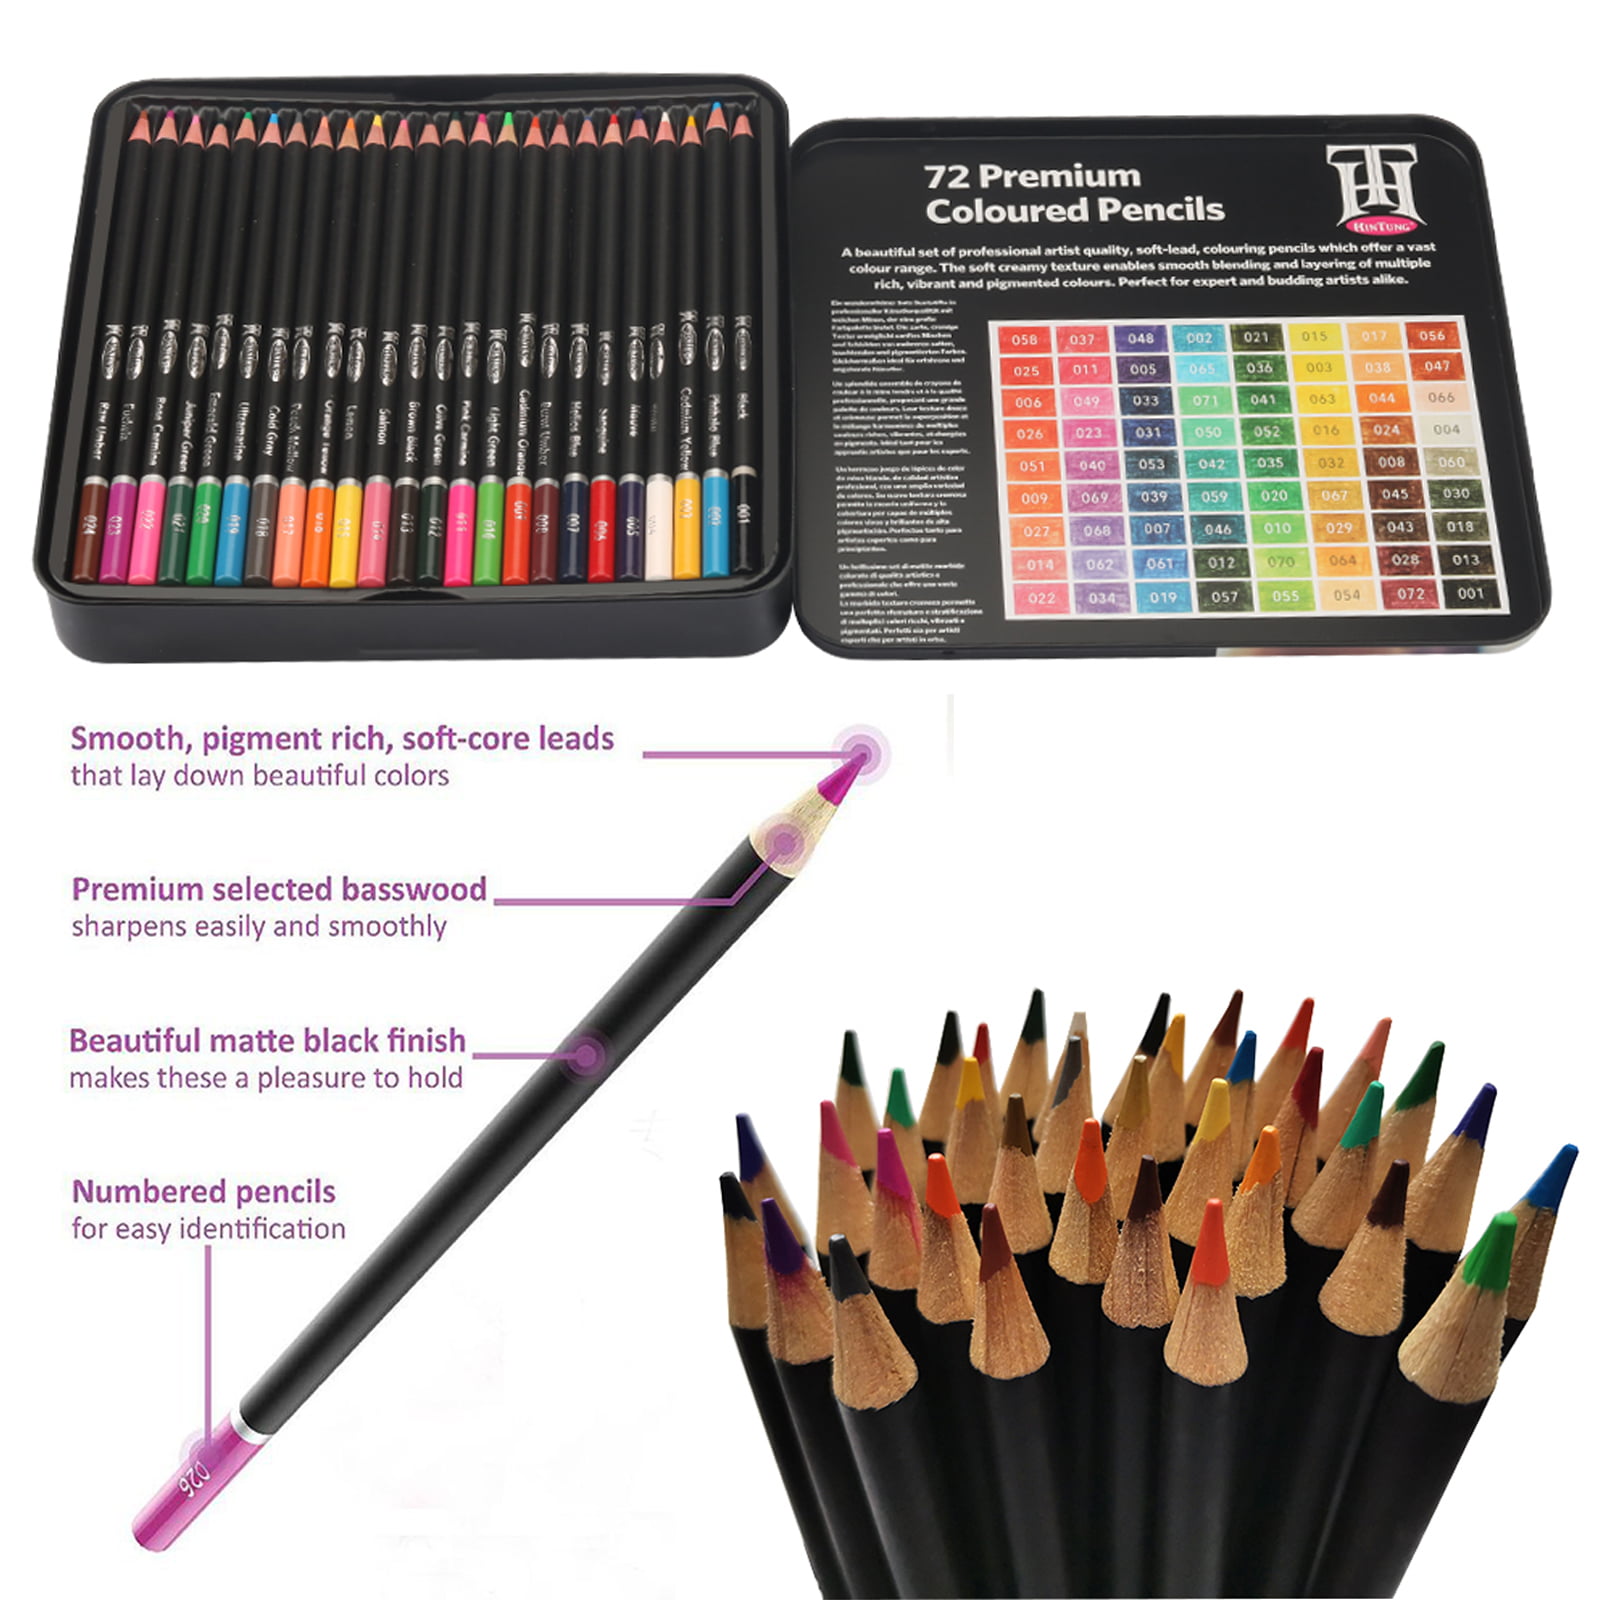  Yagol Colored Pencils for Adult Coloring Books, 72 Colored  Professional Drawing Pencils, Art Supplies for Sketching, Shading for  Beginners, kids & Pro. : Arts, Crafts & Sewing